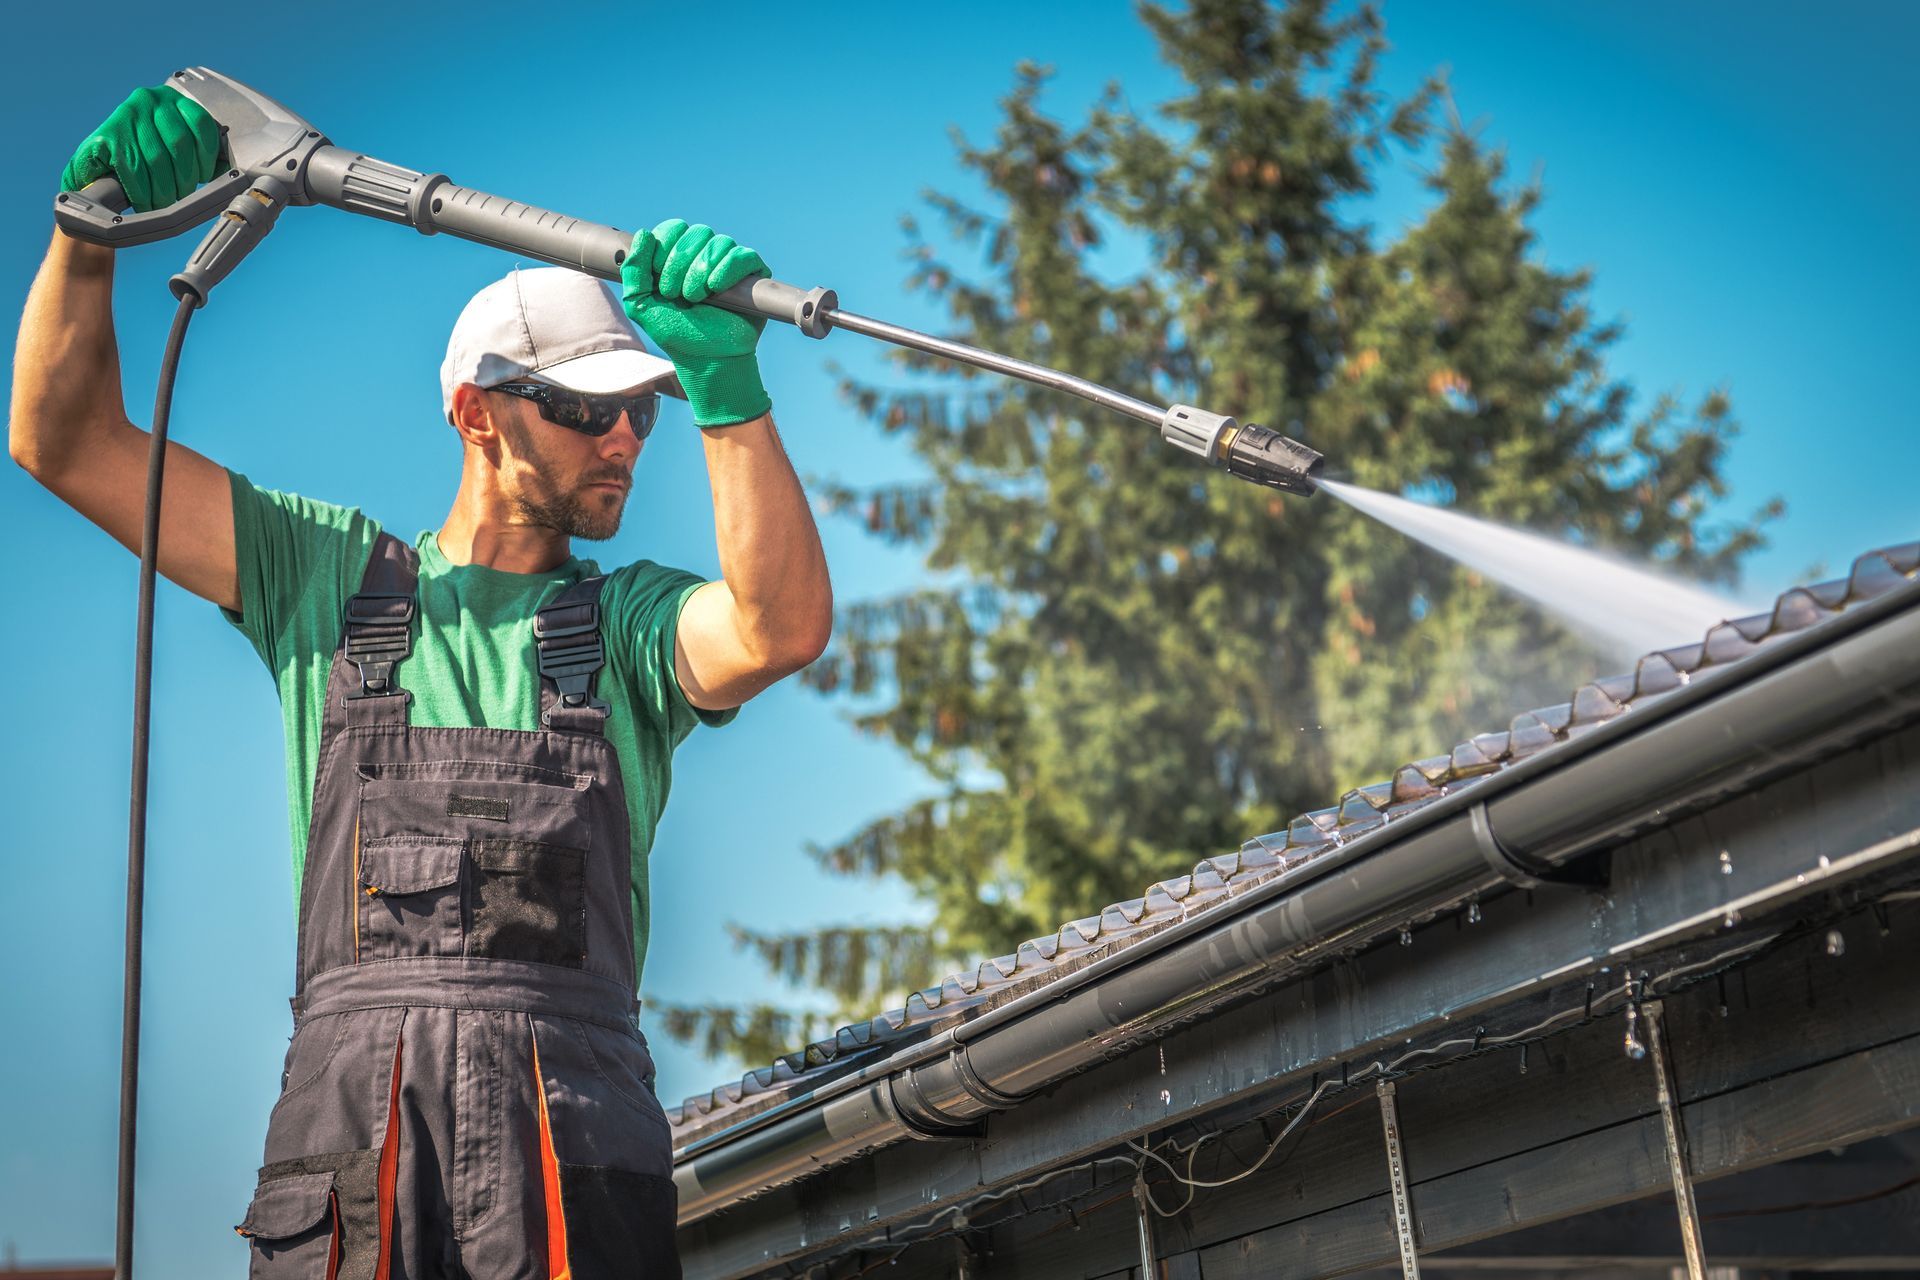 Gutter Cleaning using pressure washer